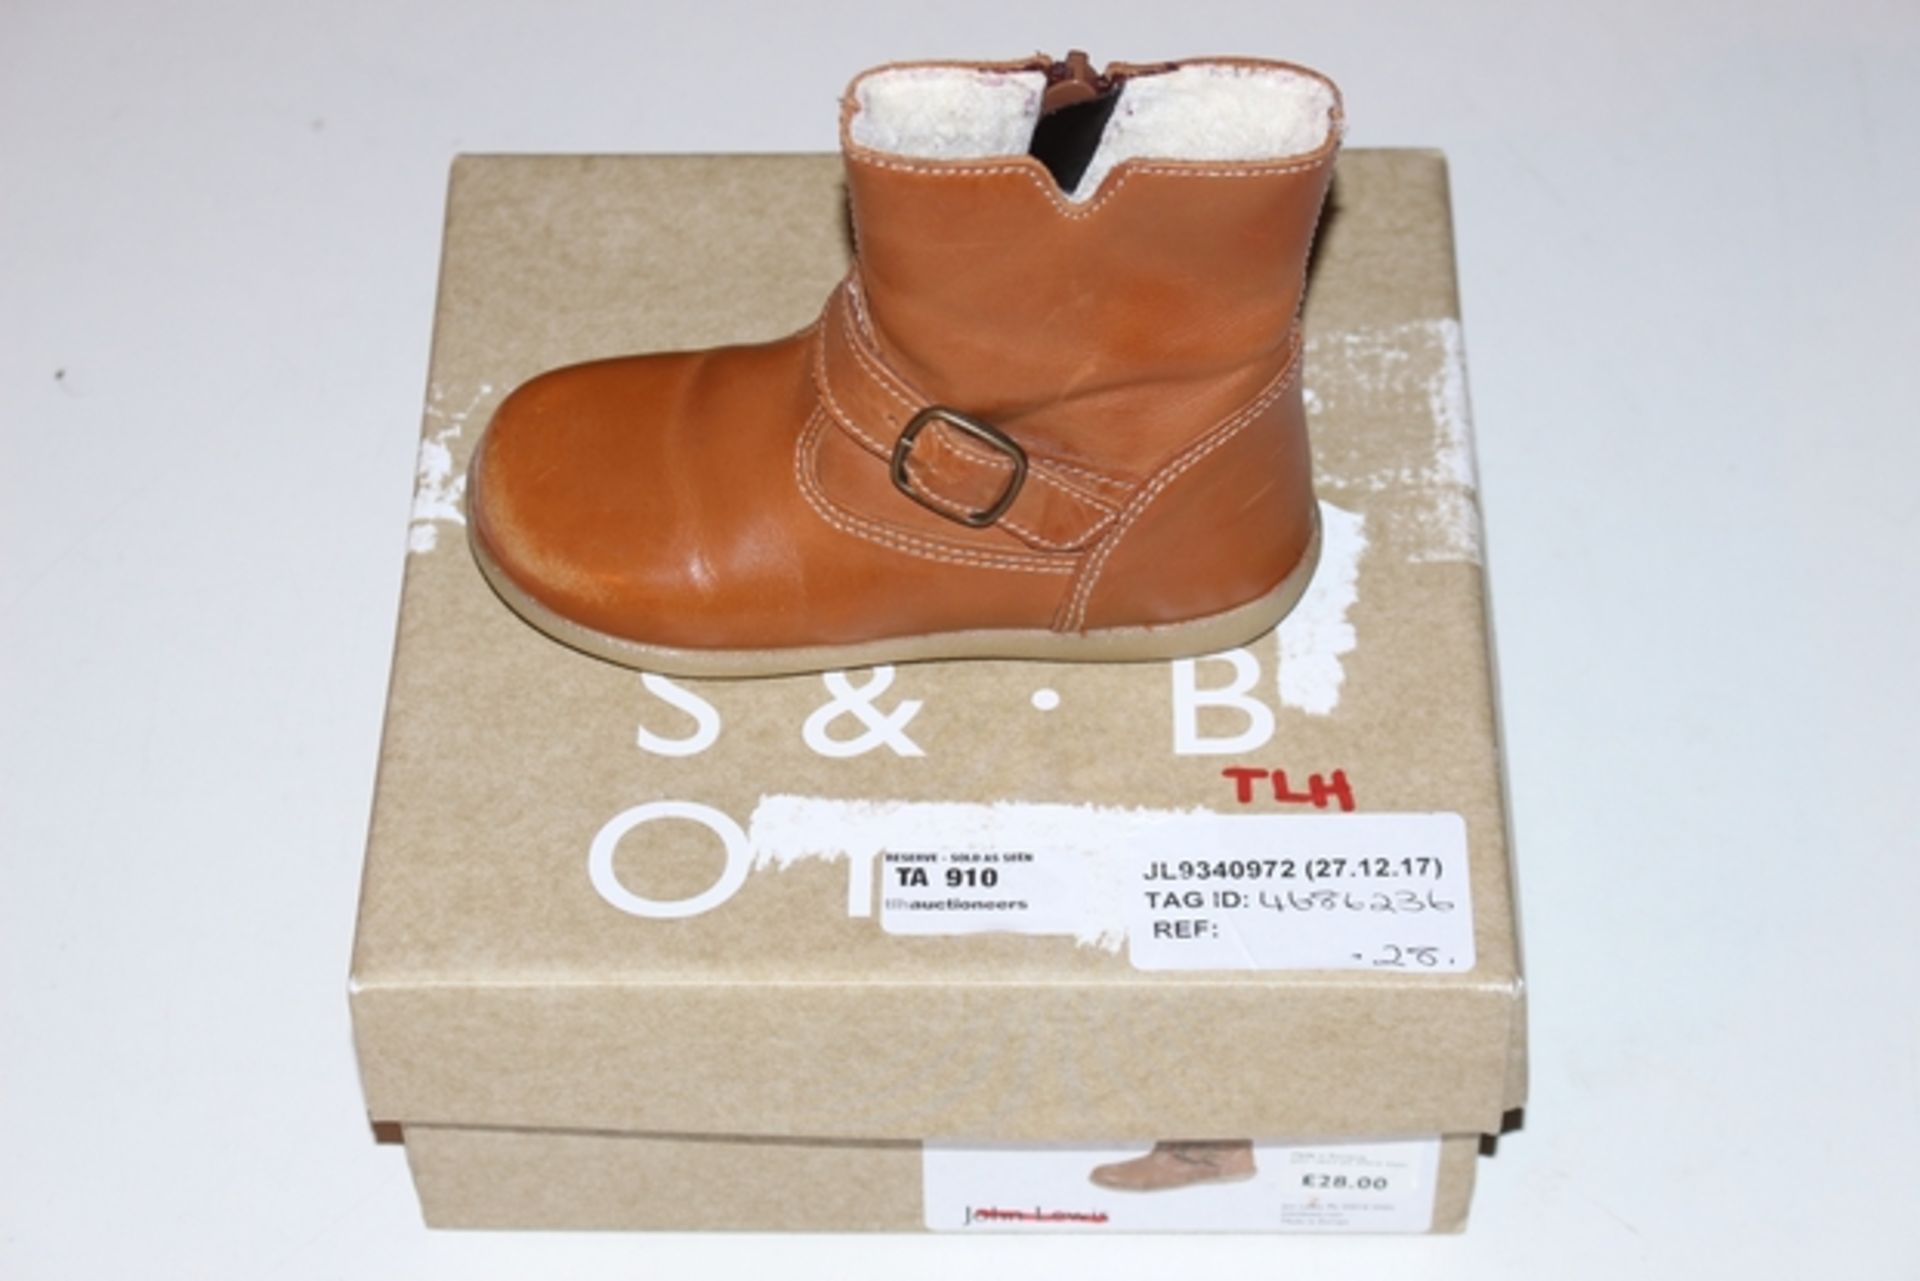 1X PAIR OF TAN CHILDREN'S BOOTS SIZE EURO 24 RRP £30 (JL-9340972) (27/12/17) (4686236)